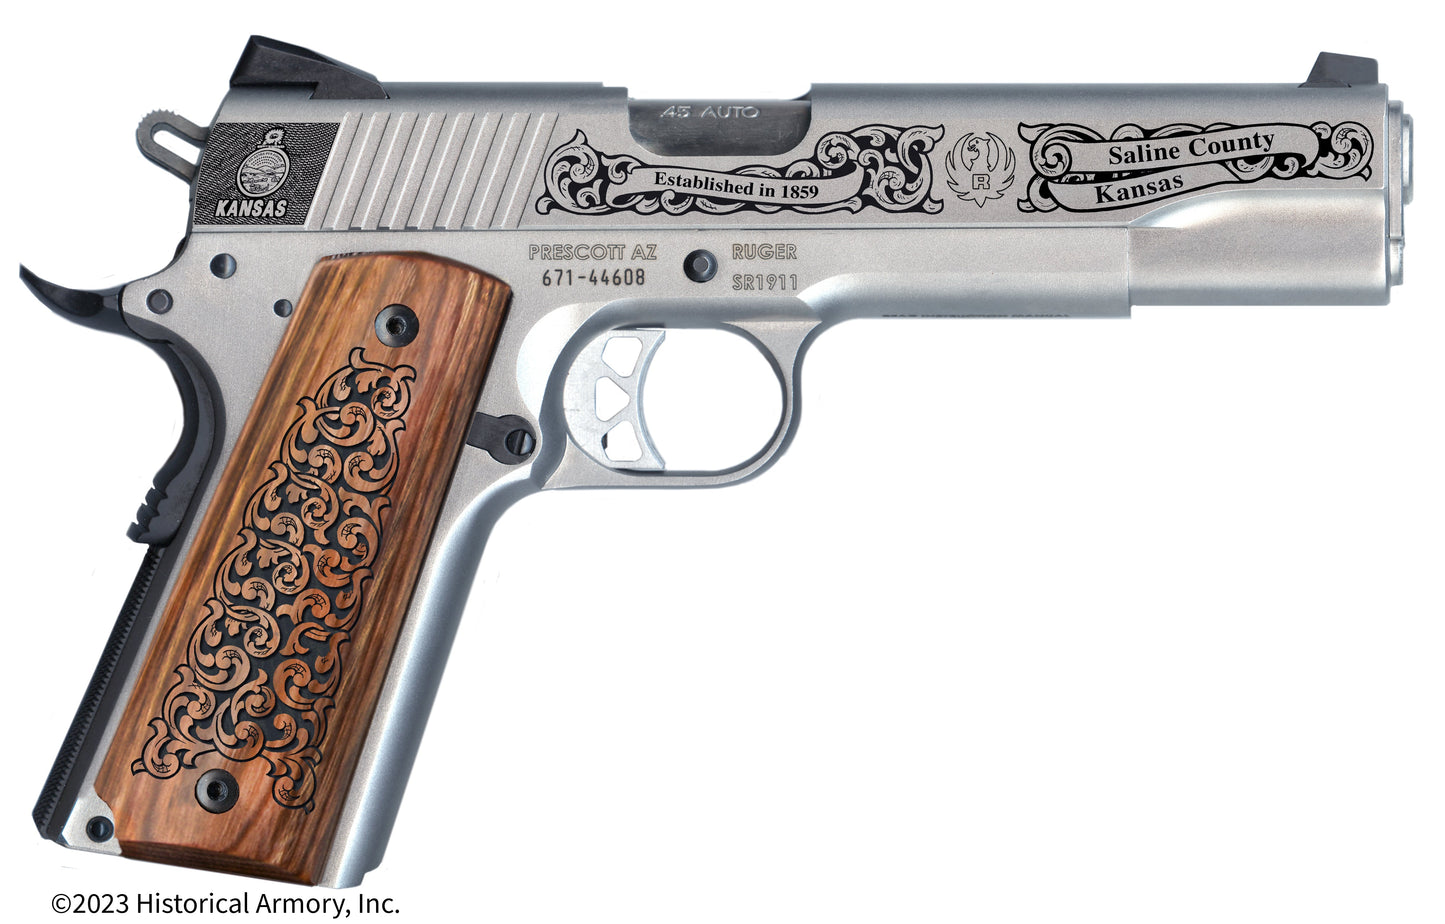 Saline County Kansas Engraved .45 Auto Ruger 1911